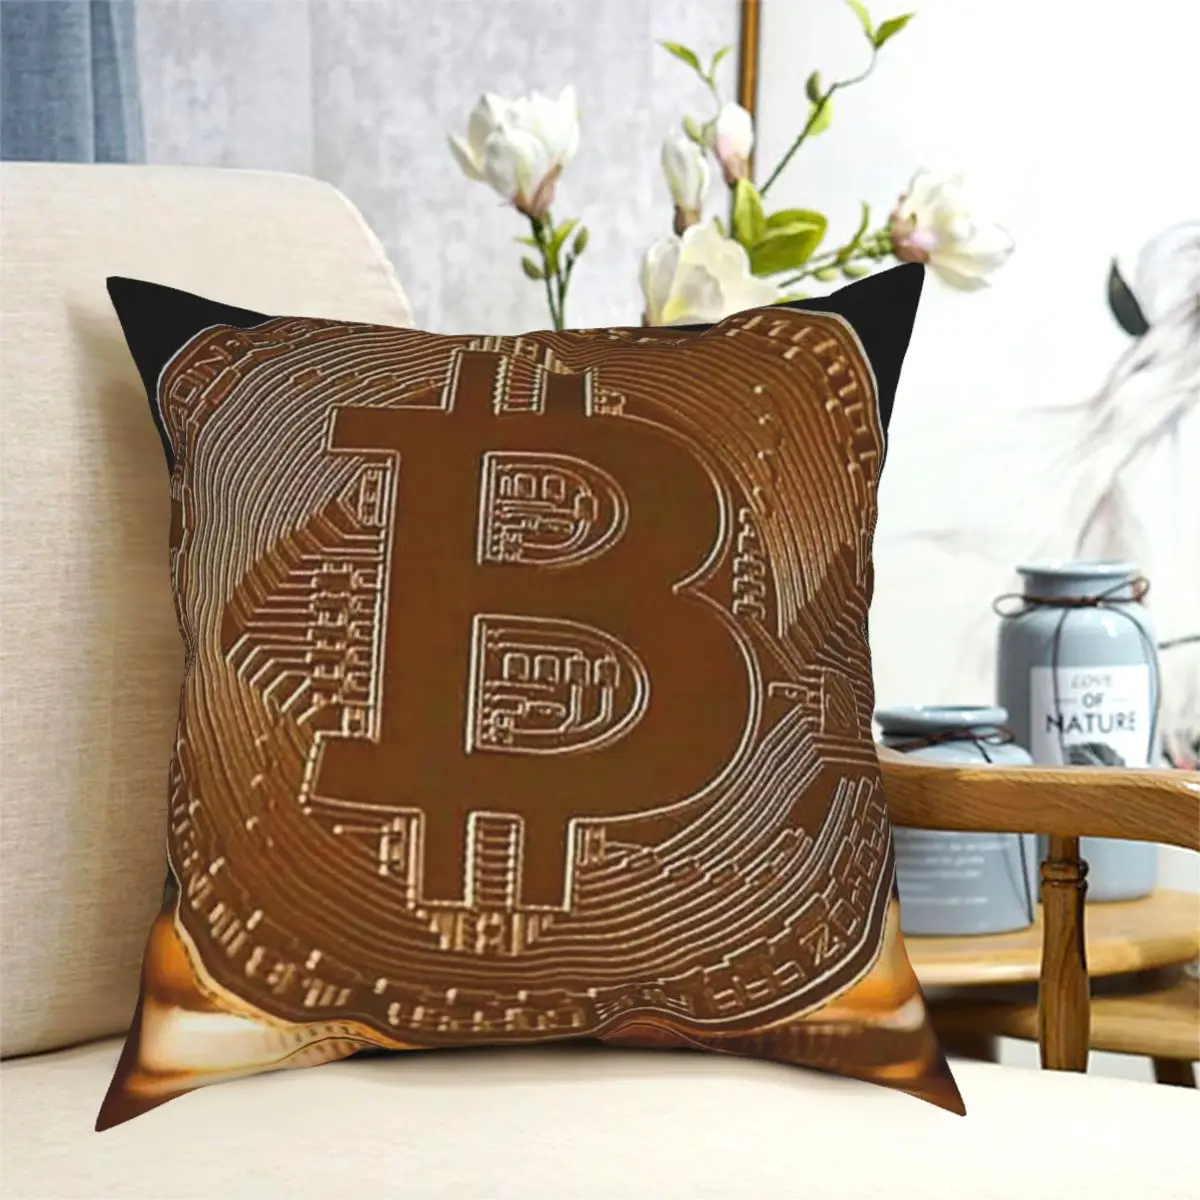 

Virtual currency Bitcoin Cryptocurrency Throw Pillow Cushion Cover Decorative Pillowcases Case Home Sofa Cushions 40x40,45x45cm